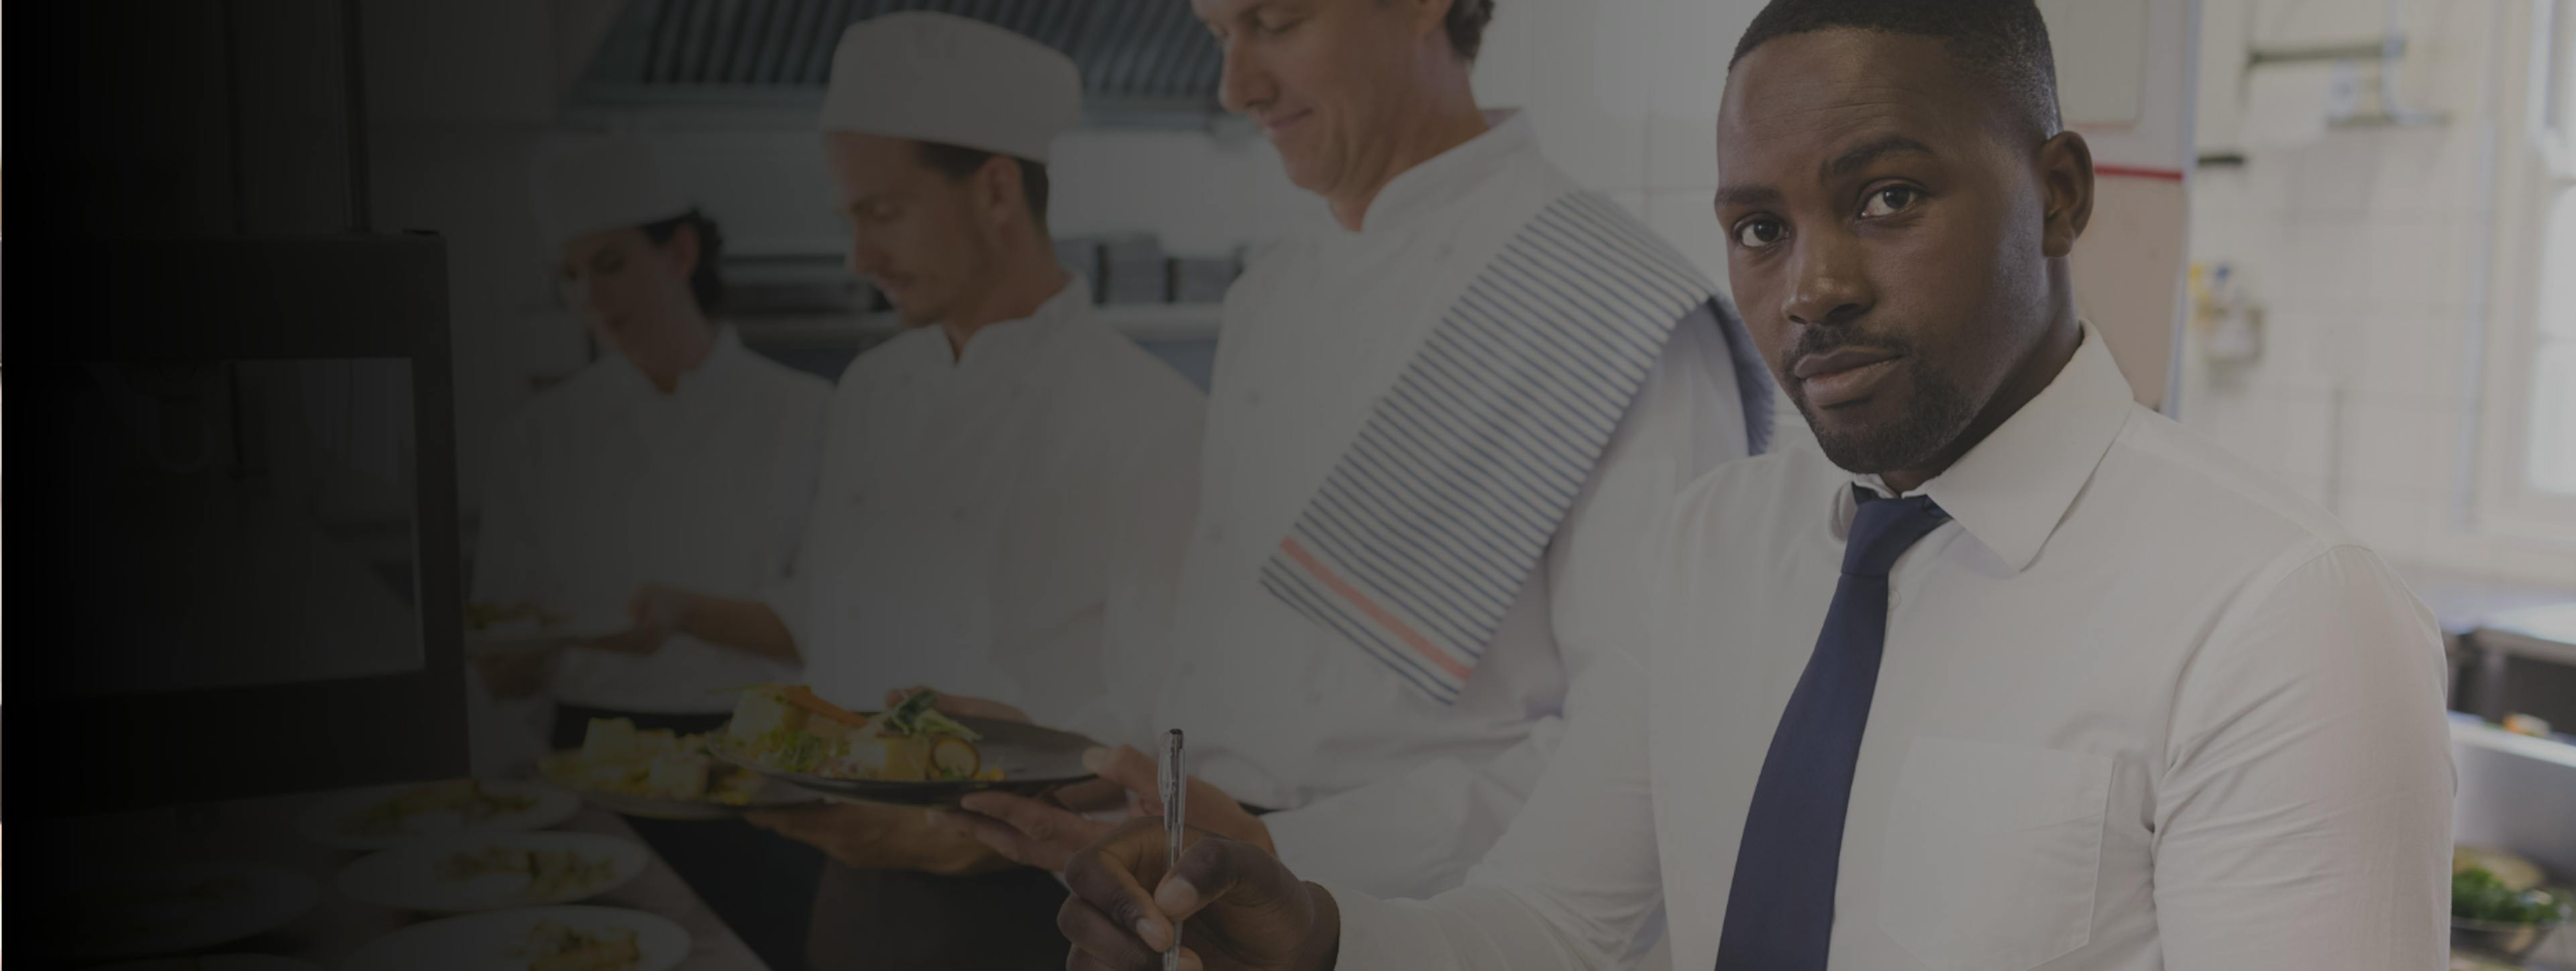 A front of house manager with three chefs standing in a commercial kitchen